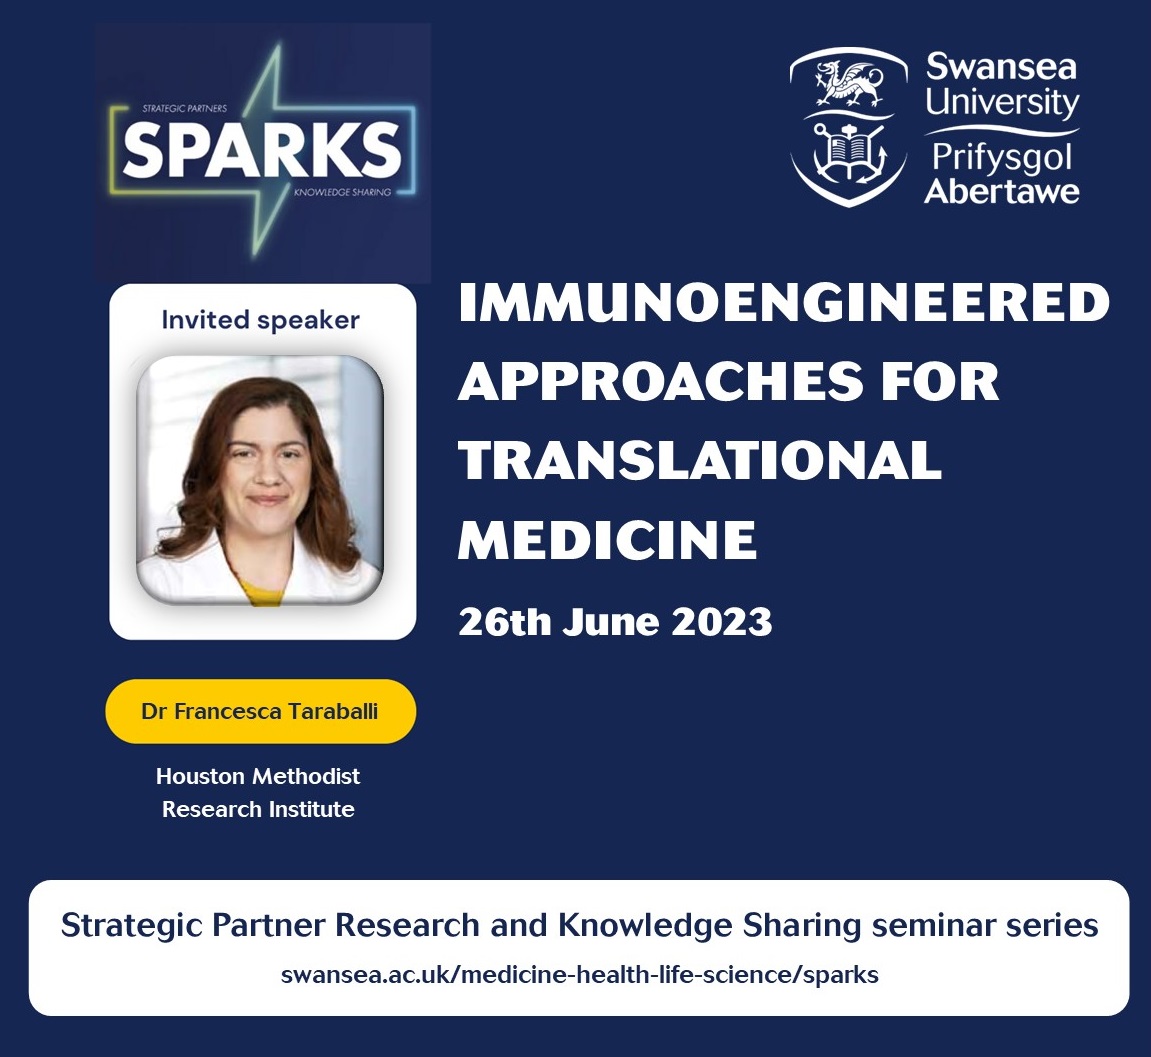 We are excited to be hosting @TaraballiPhD from @MethodistHosp as part of our Strategic Partnership Research & Knowledge Sharing (SPARKS) seminar series